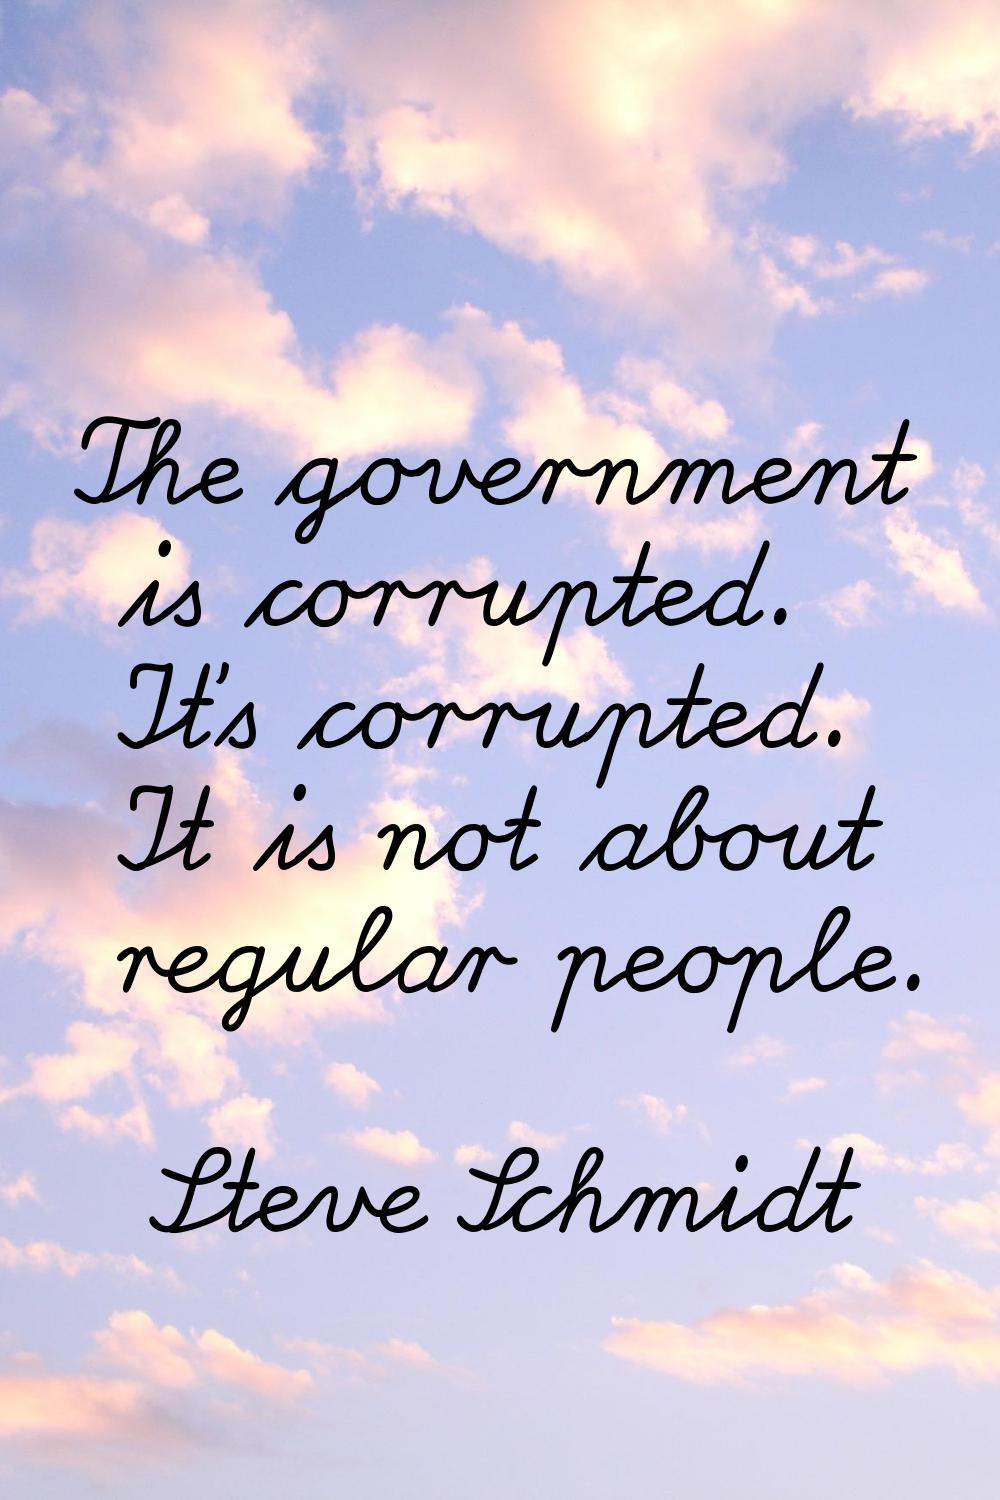 The government is corrupted. It's corrupted. It is not about regular people.